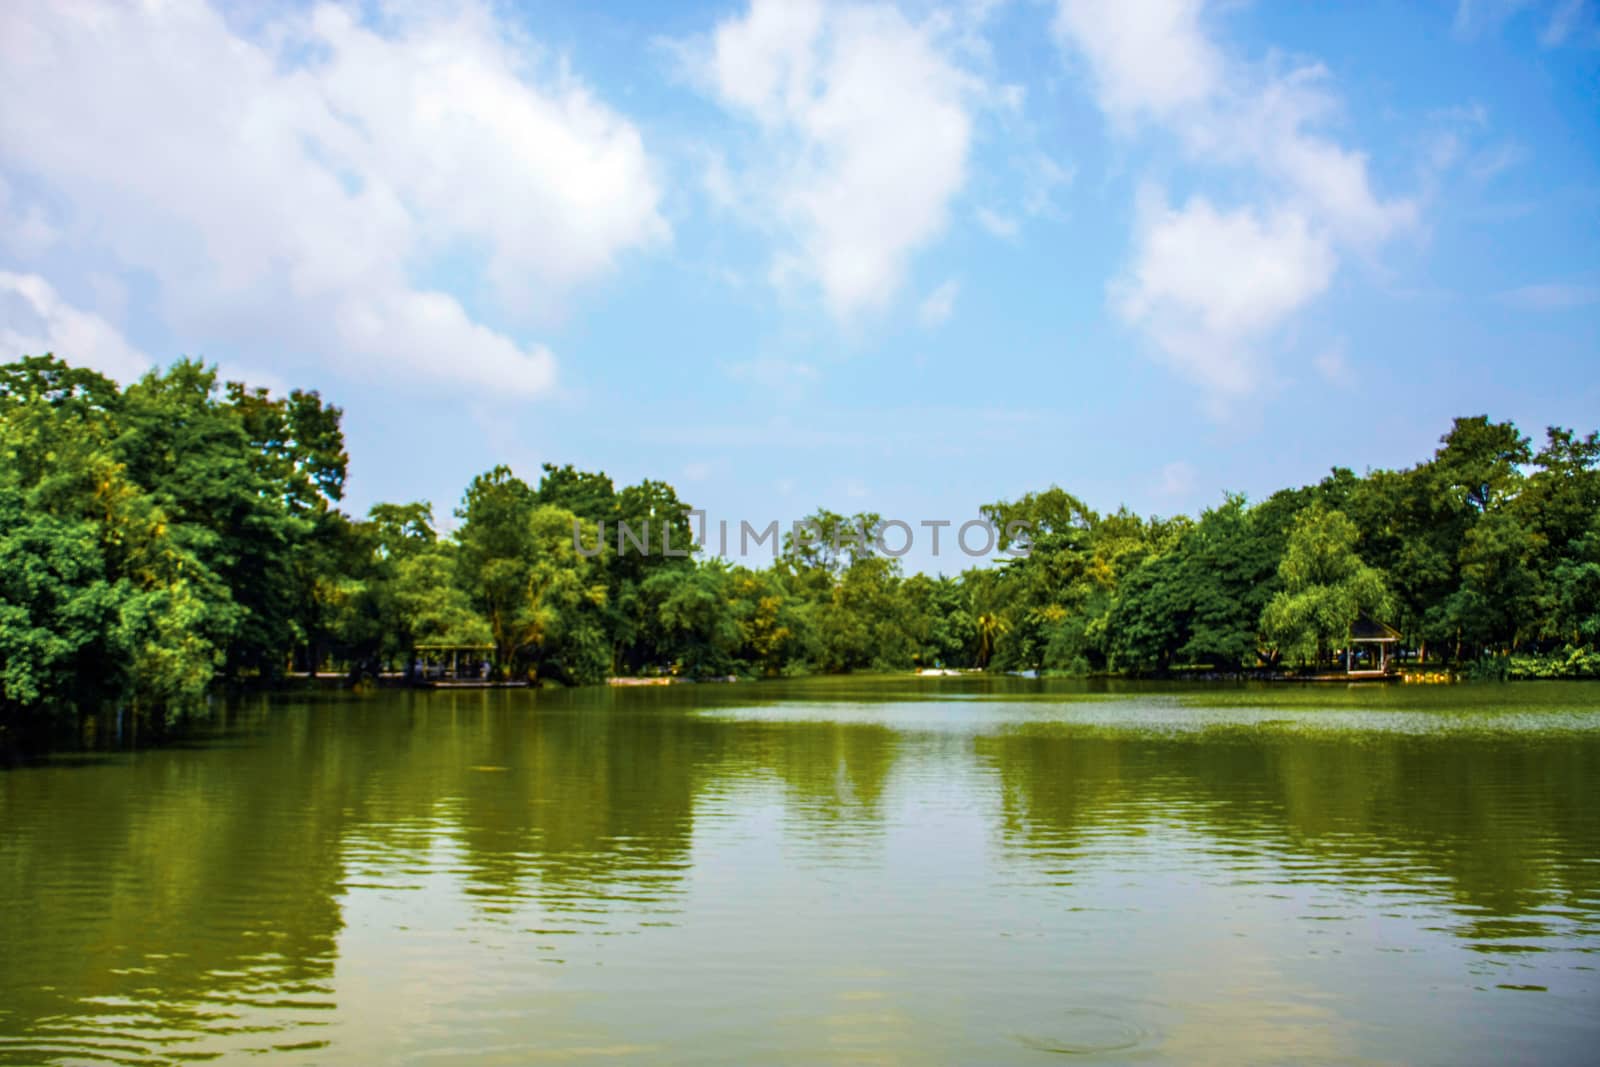 beautiful reflecting trees and blue sky on pond in park of Silpakorn University, Nakhonpathom